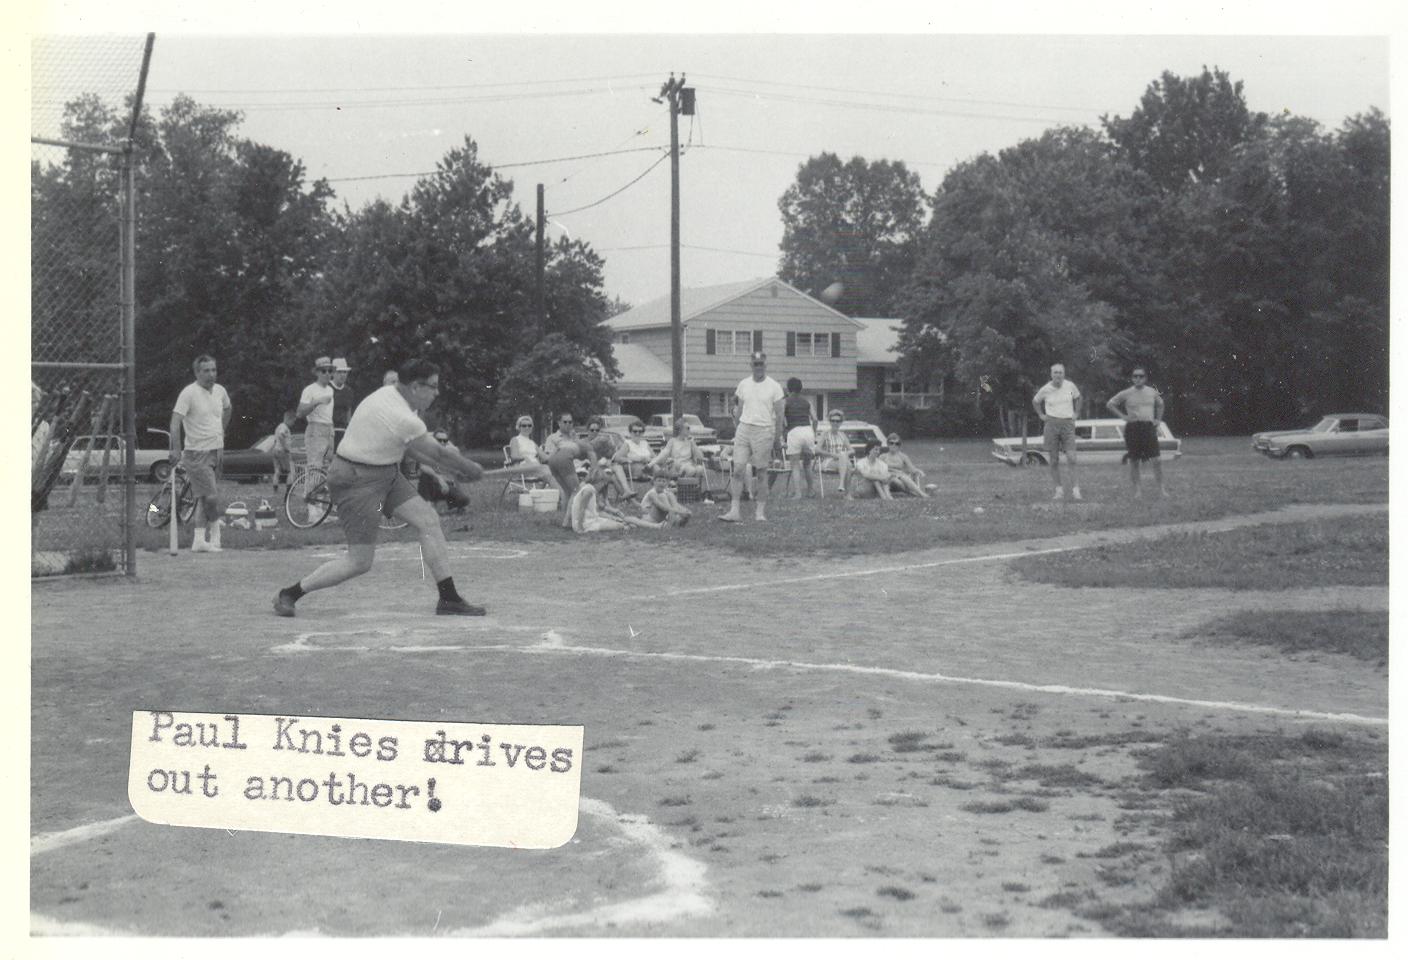 1967-The Father-Son Baseball Game! | The Roslyn Road Salem Ridge Gang!